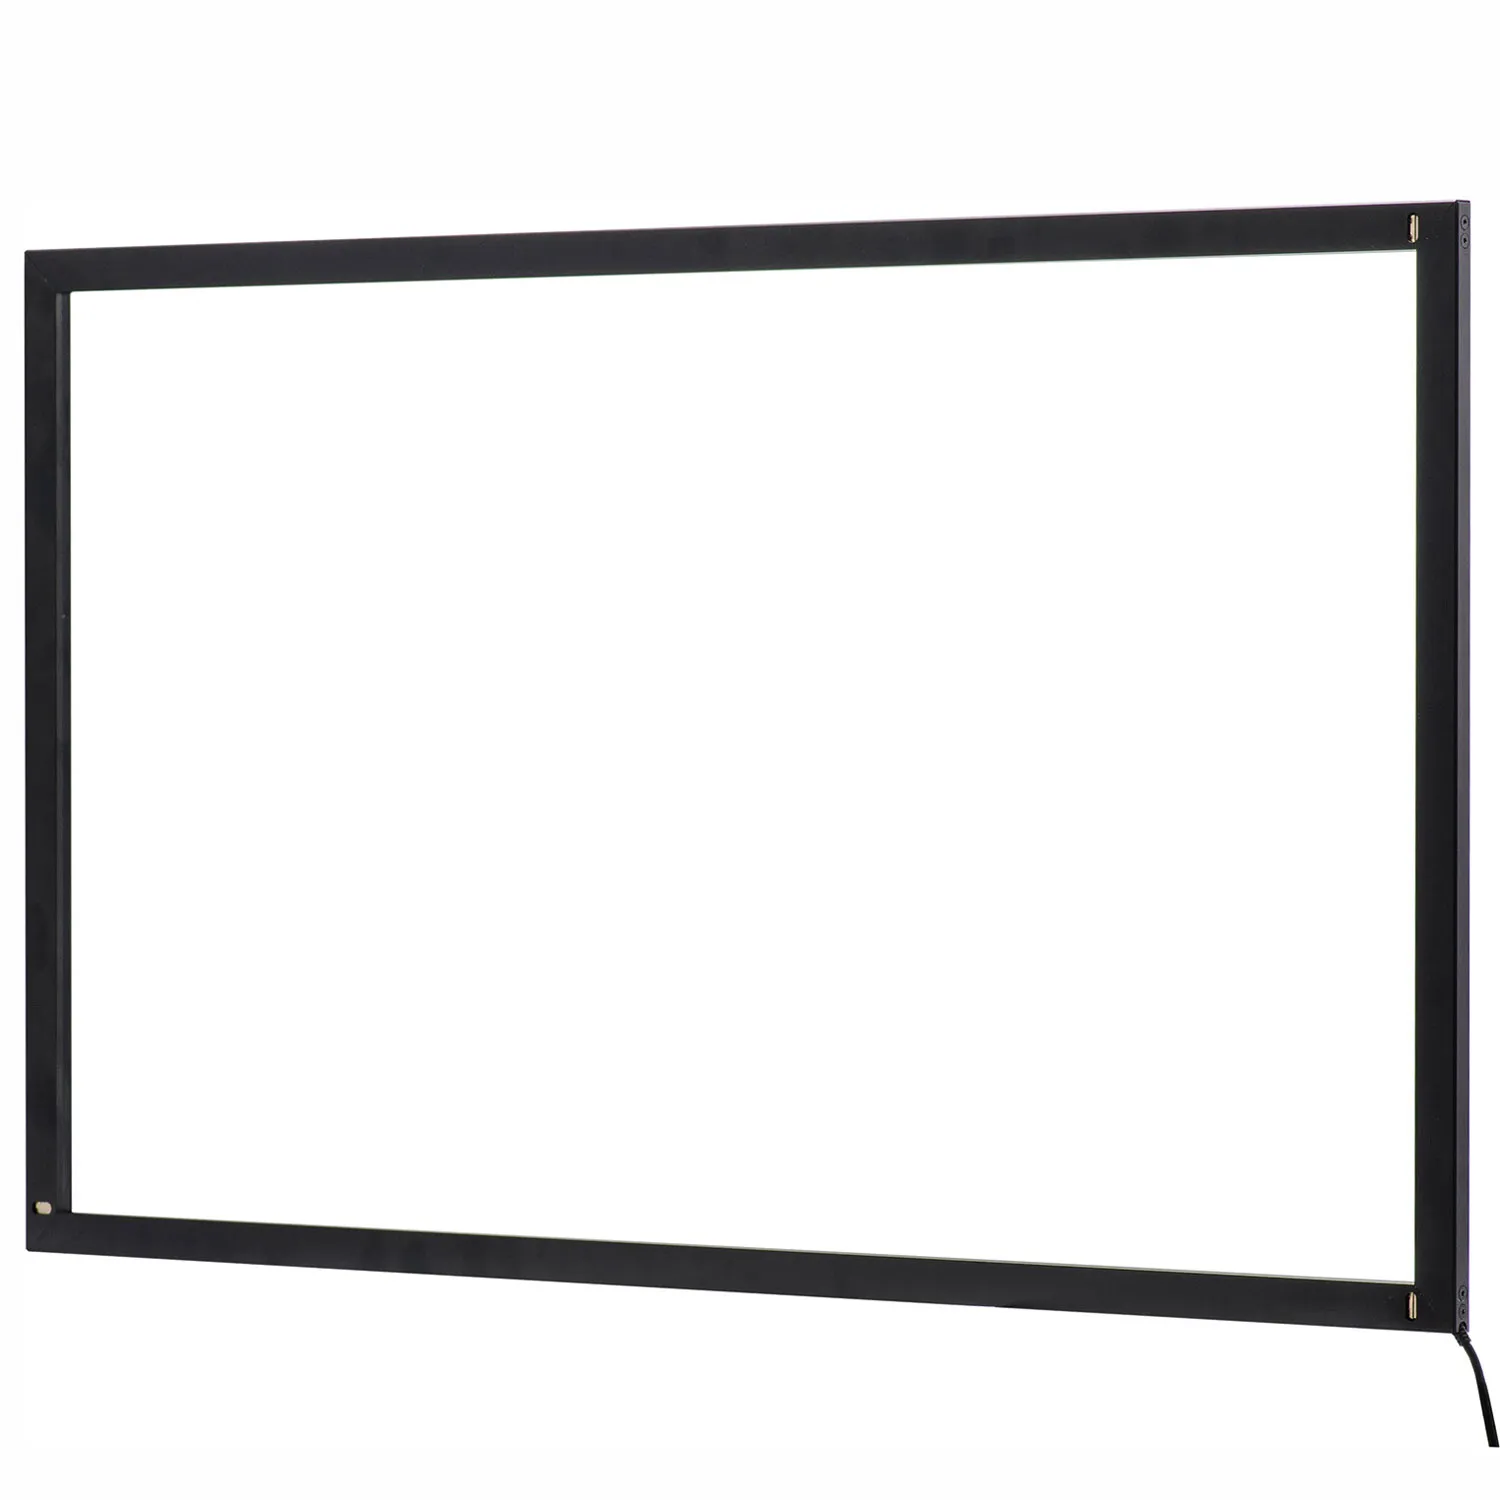 Touch Screen Keetouch GmbH 80" frame KP-800-IP0S001